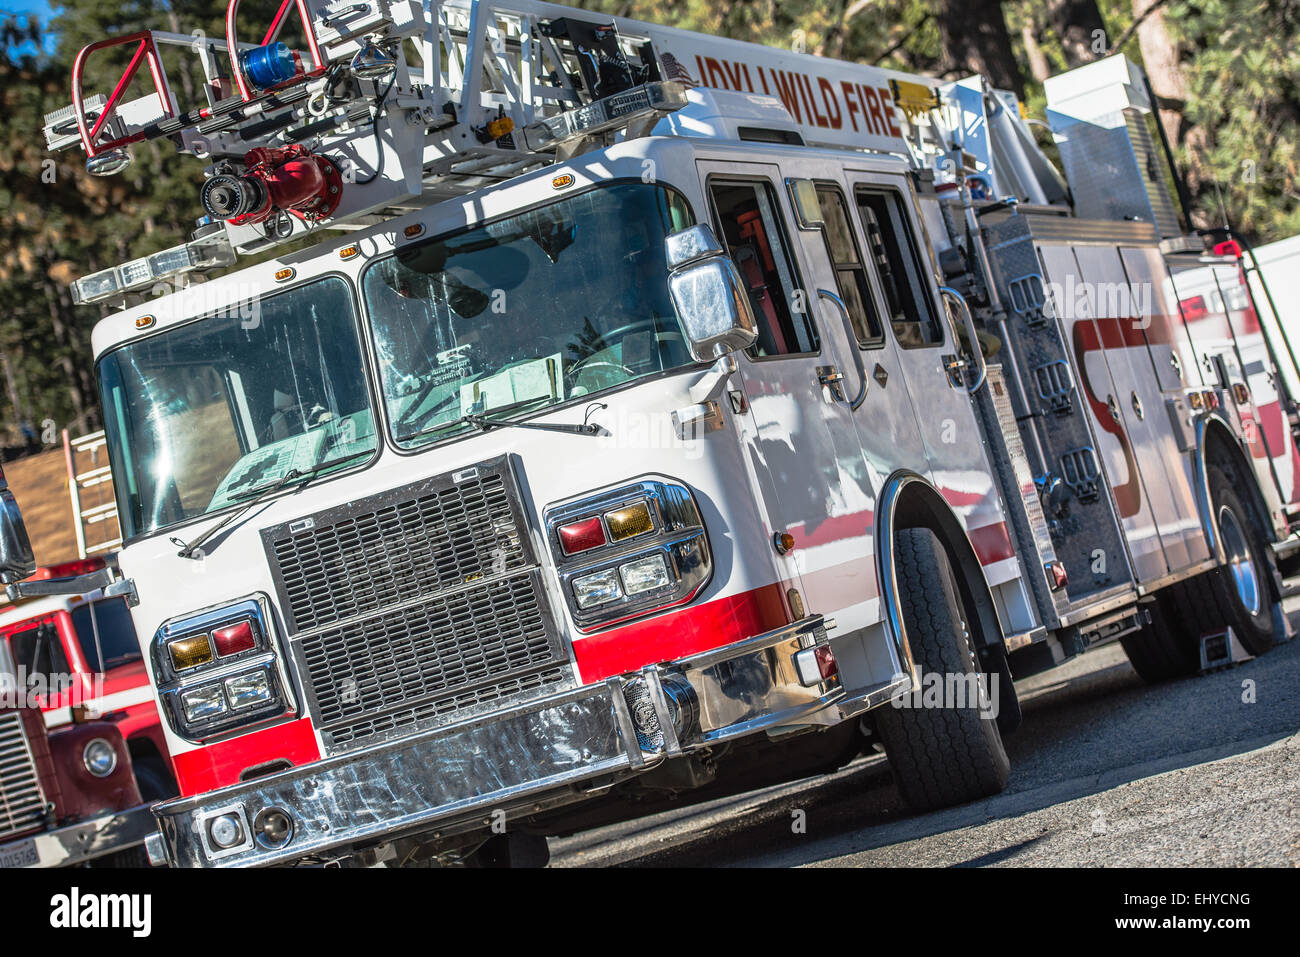 American Fire Truck. Firefighters Station. Fire Engine Closeup Stock Photo: 79893340 - Alamy